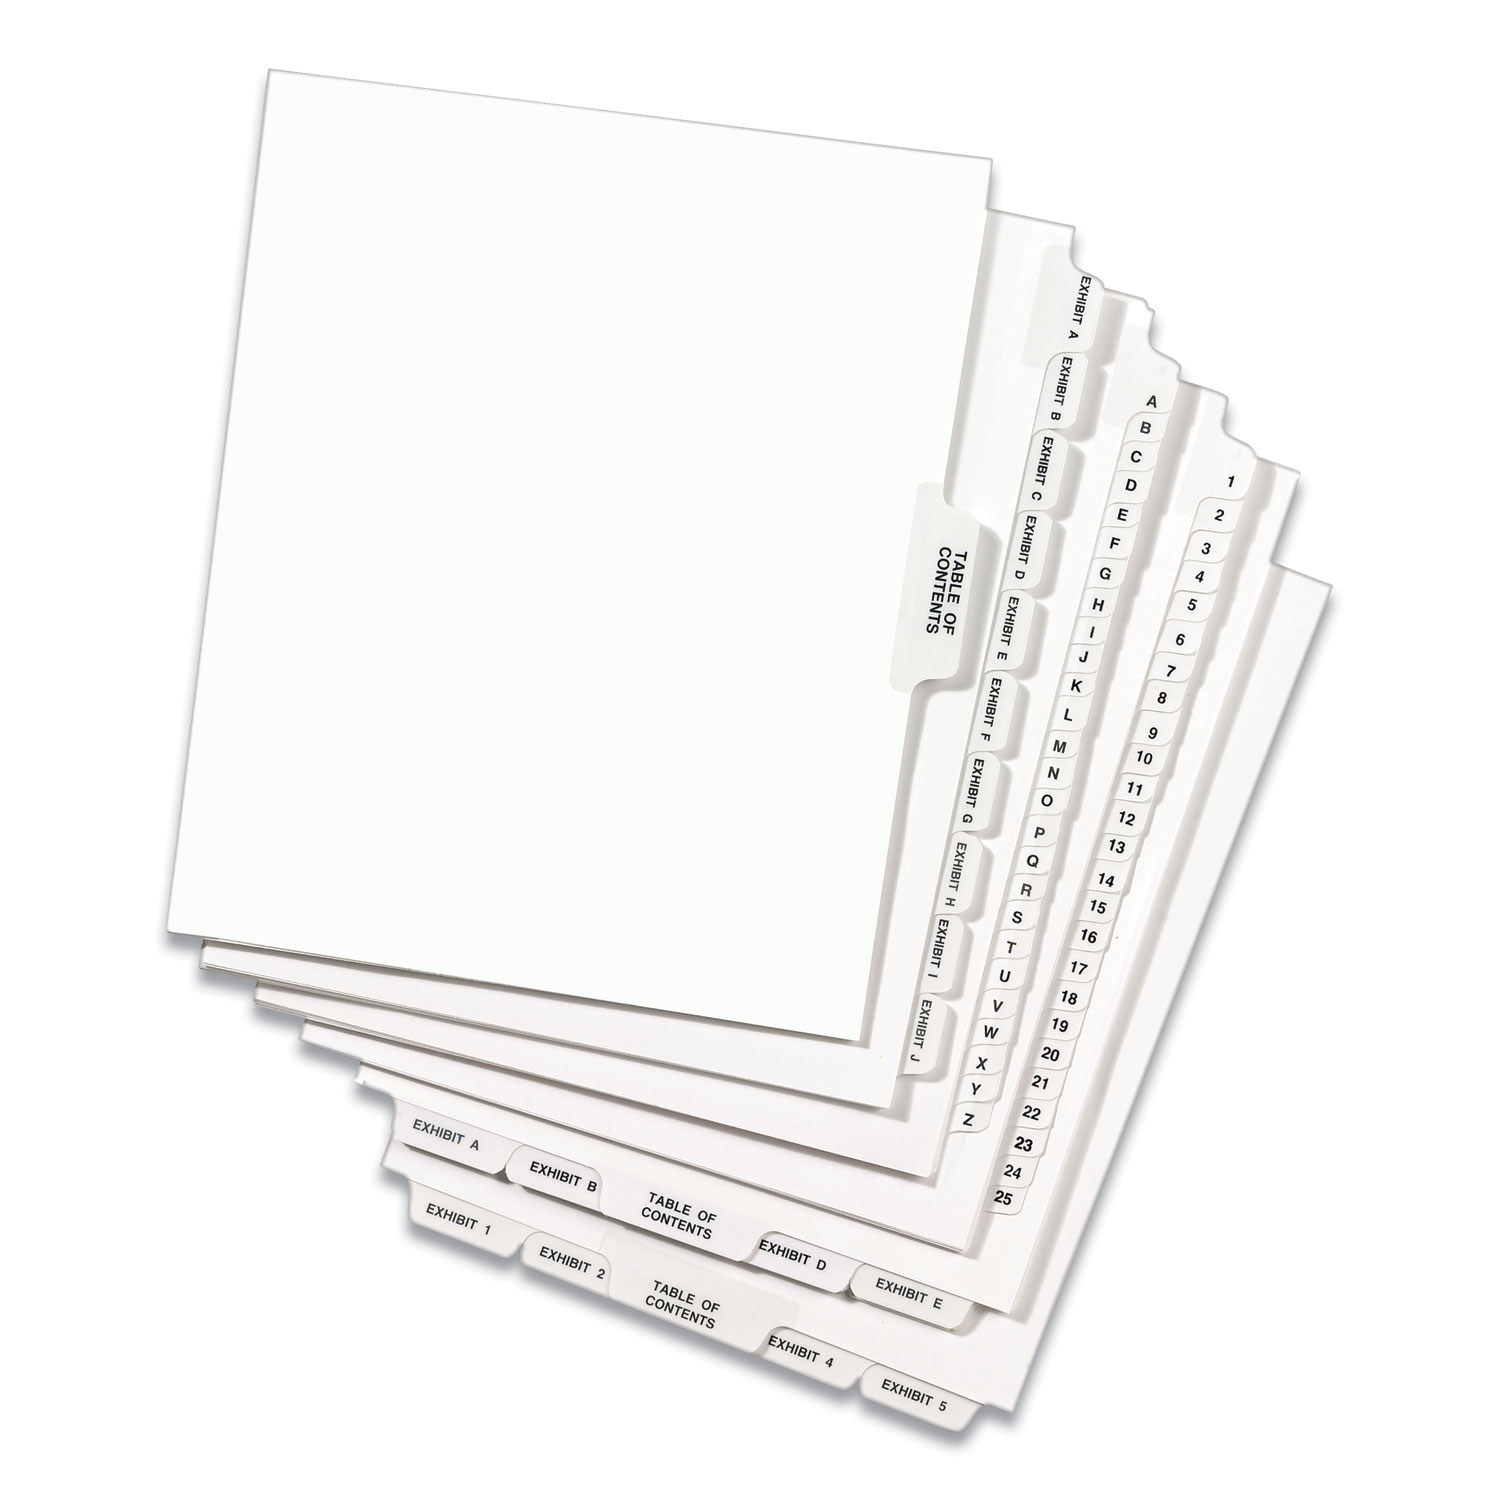 5 X Tab Blank for sale online Avery Dennison Ave-11443 Index Maker Clear Label Divider 